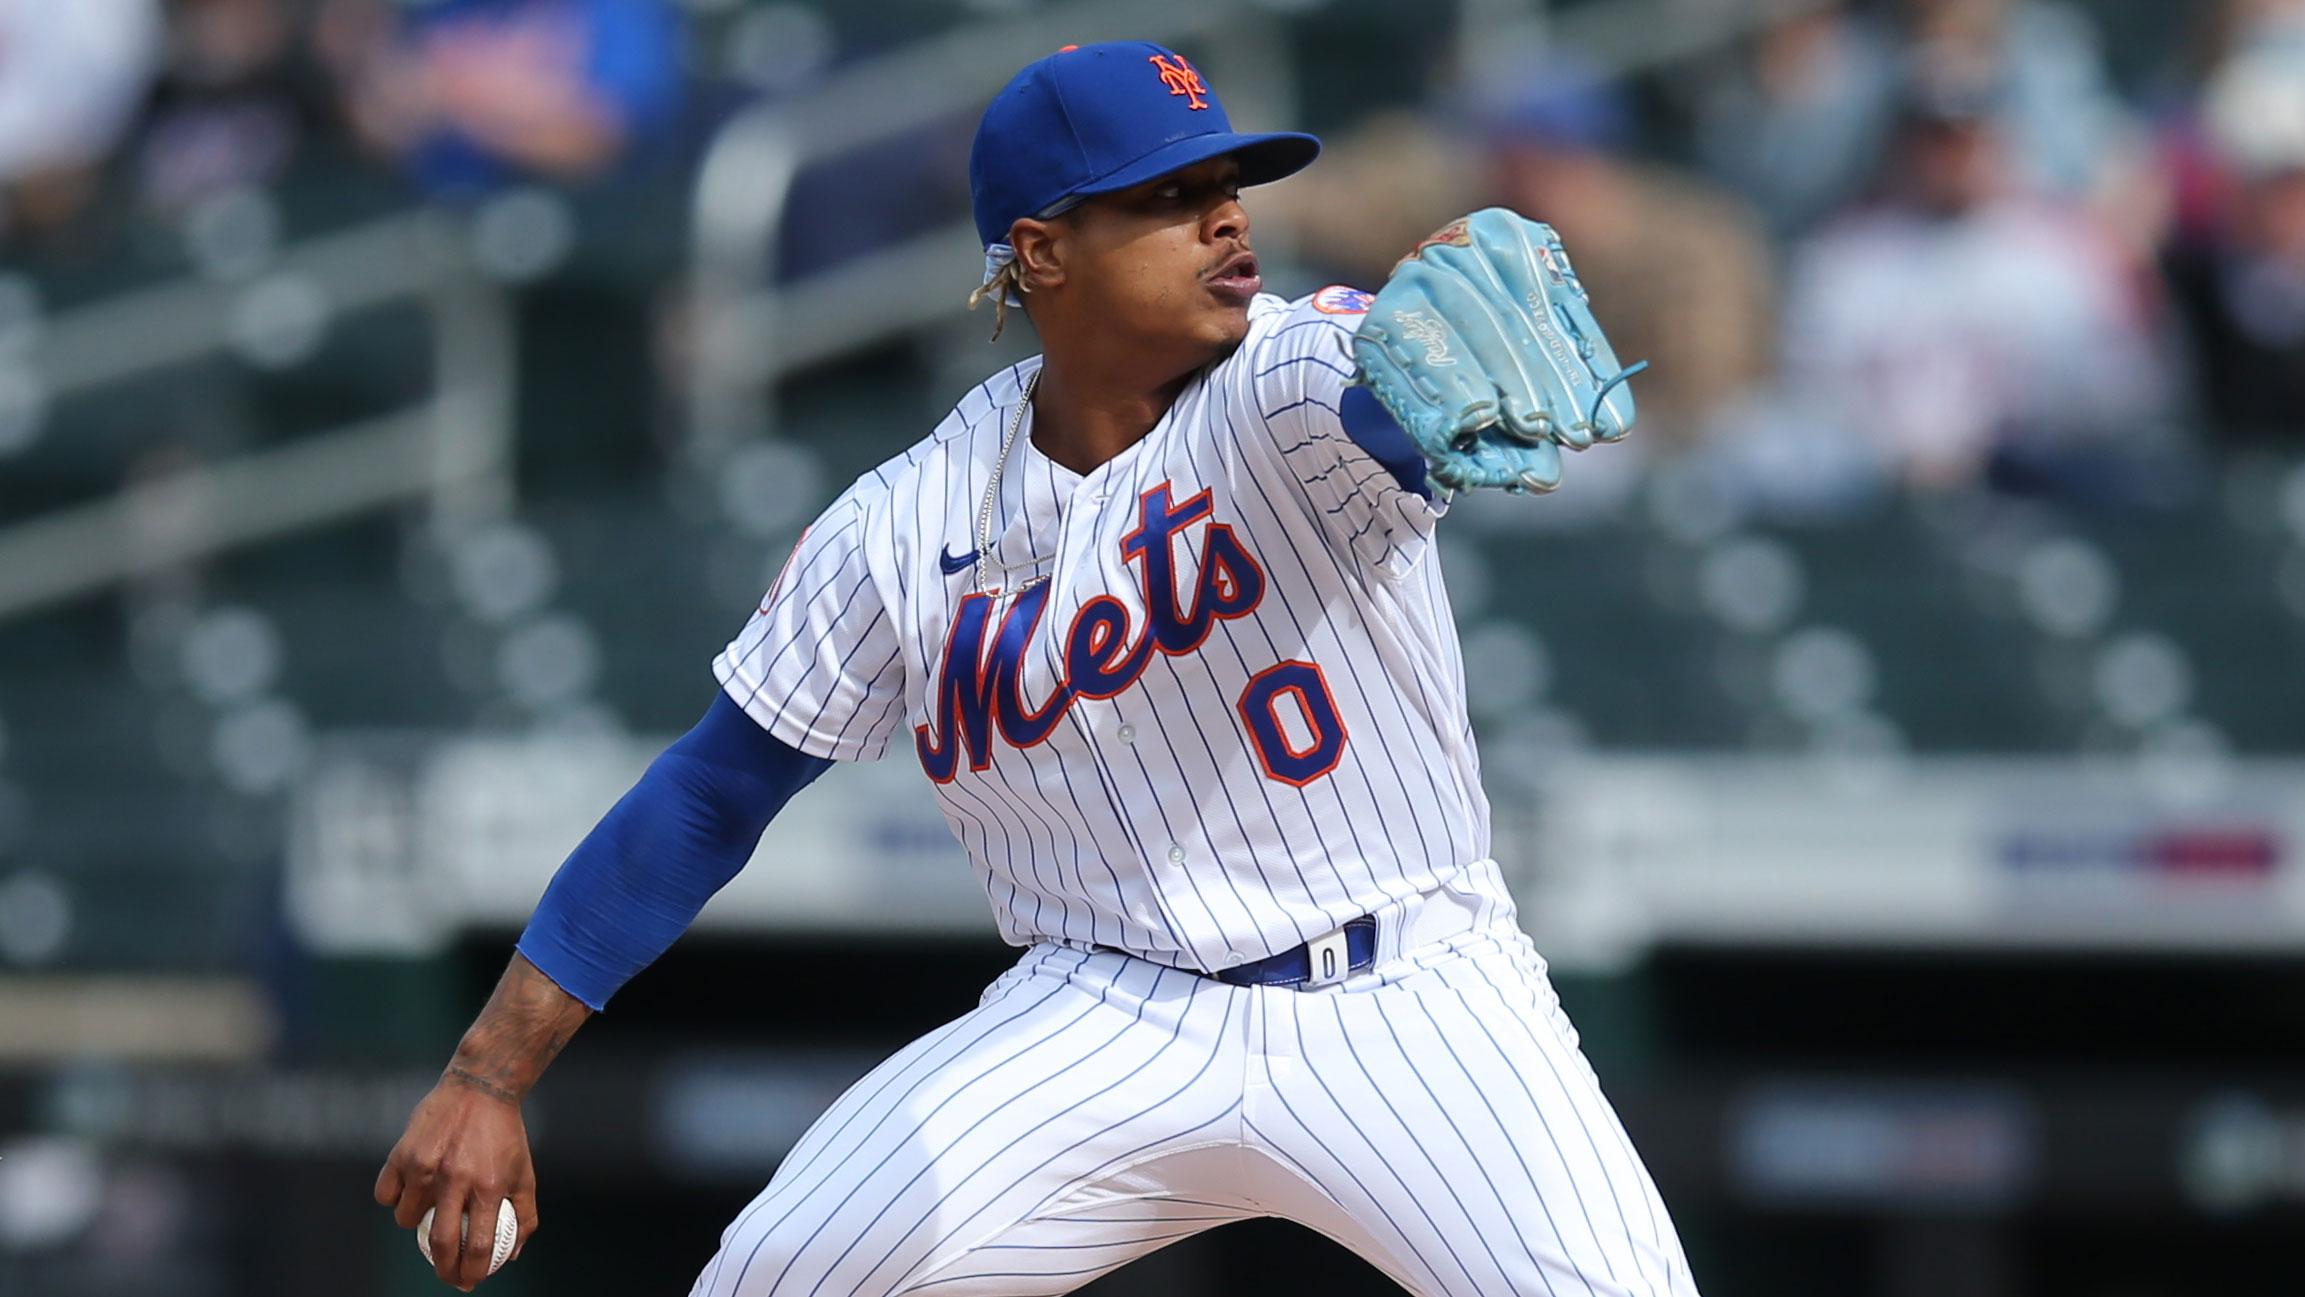 Apr 24, 2021; New York City, New York, USA; New York Mets starting pitcher Marcus Stroman (0) pitches against the Washington Nationals during the first inning at Citi Field. / Brad Penner-USA TODAY Sports